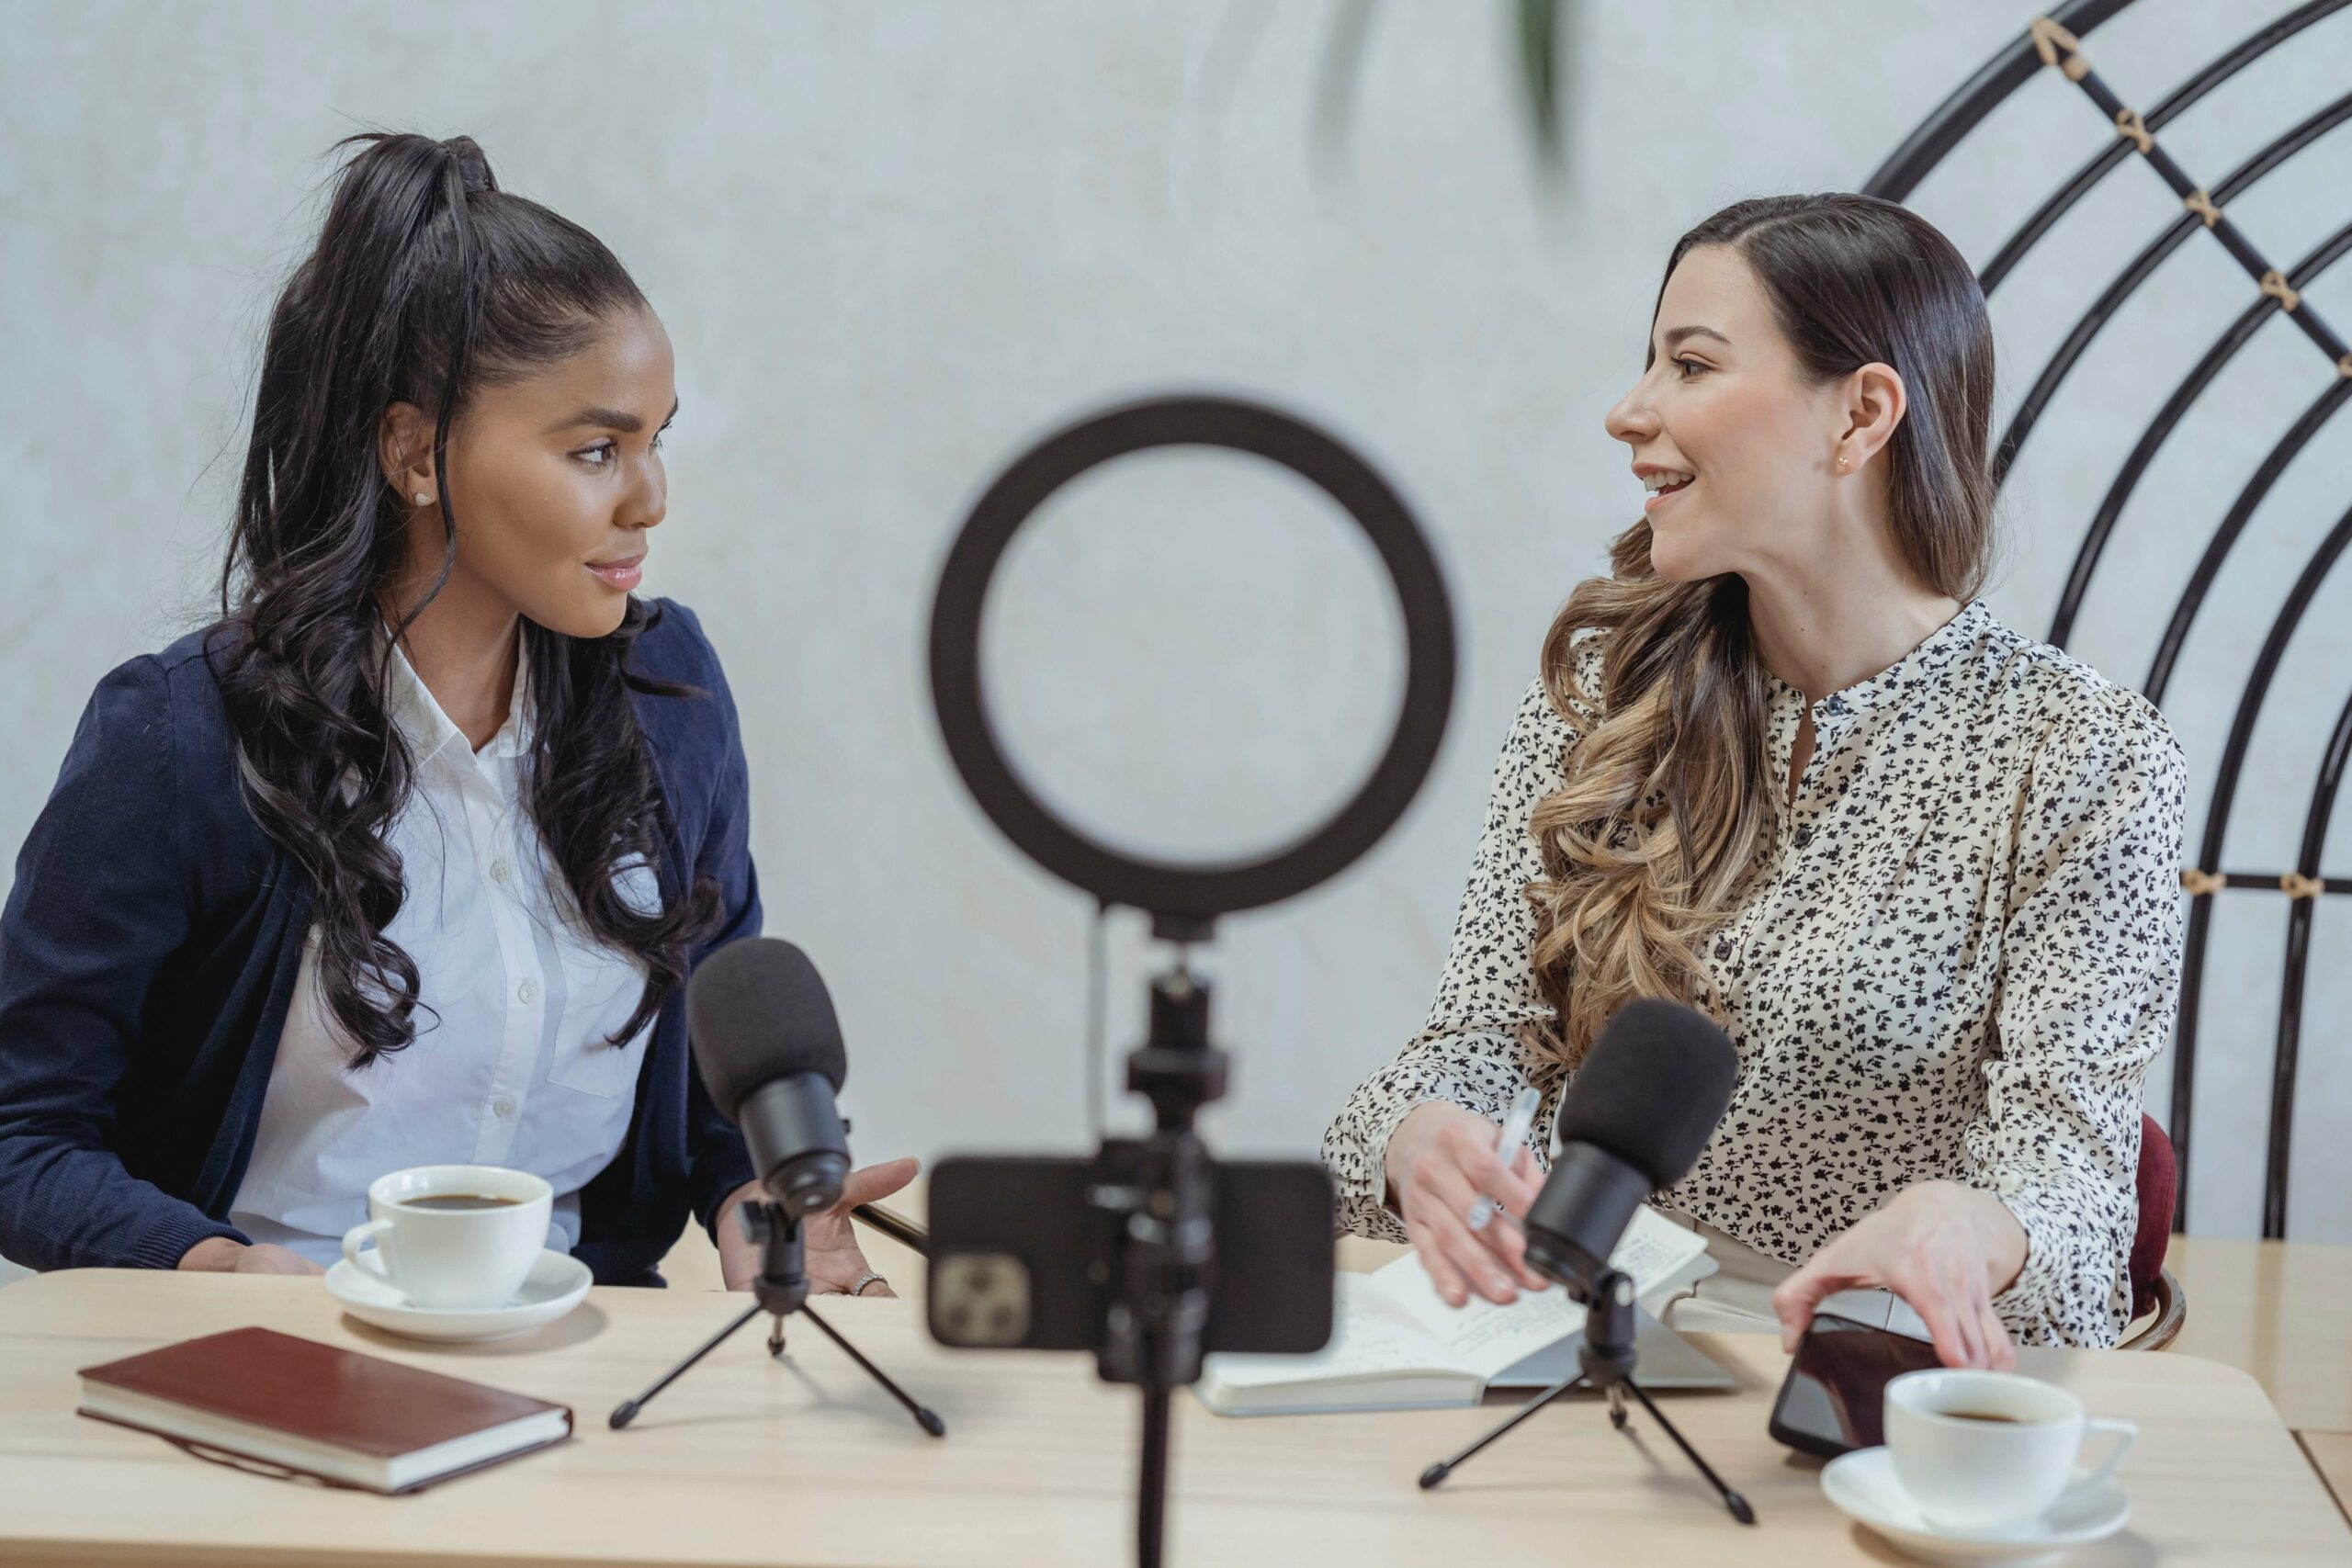 The role of guest interviews and collaborations in growing your podcast audience